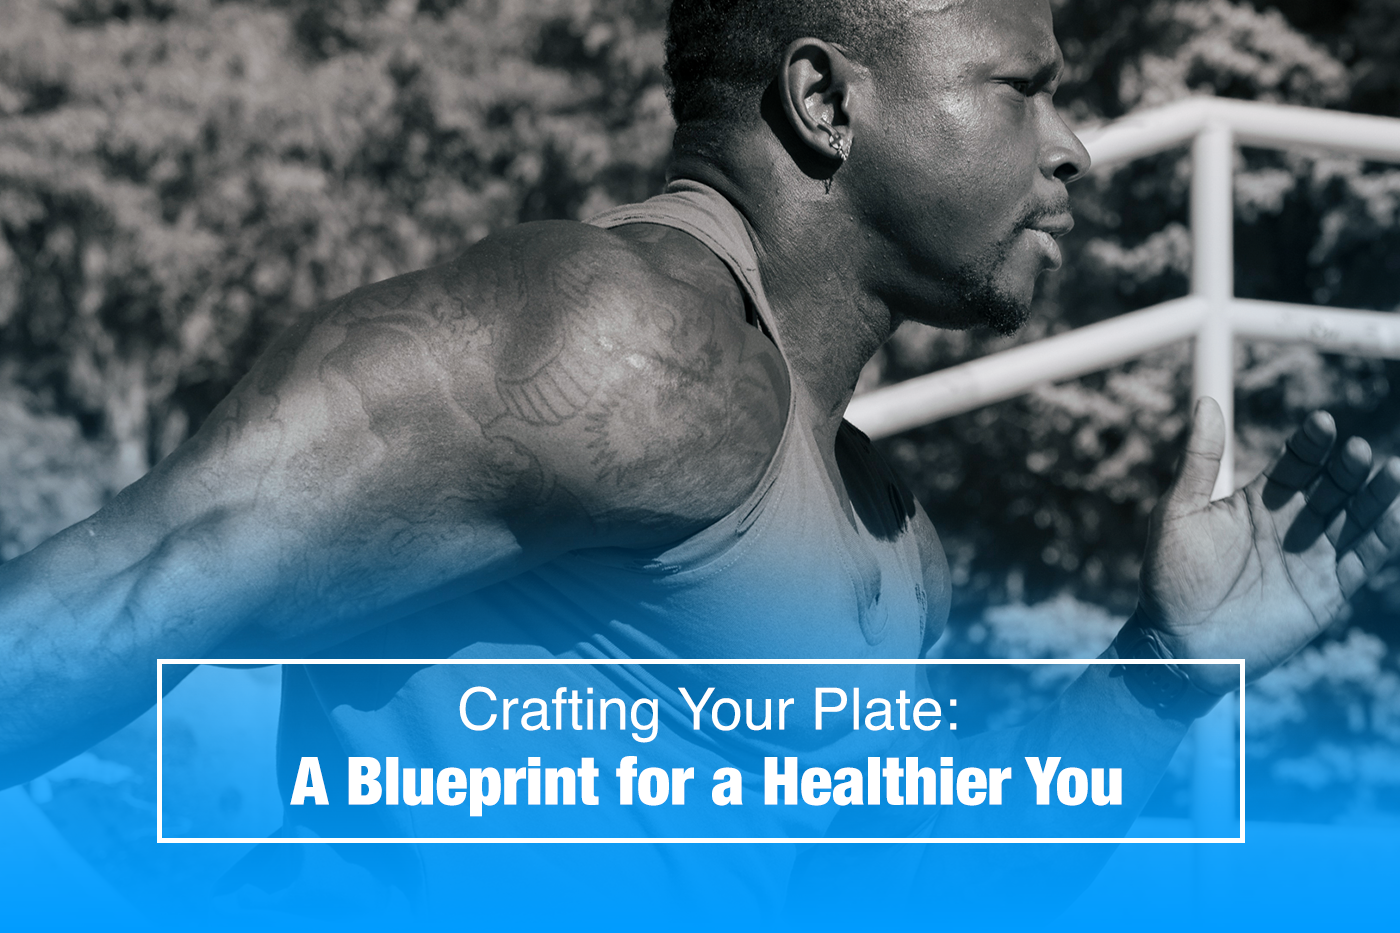 Crafting Your Plate: A Blueprint for a Healthier You